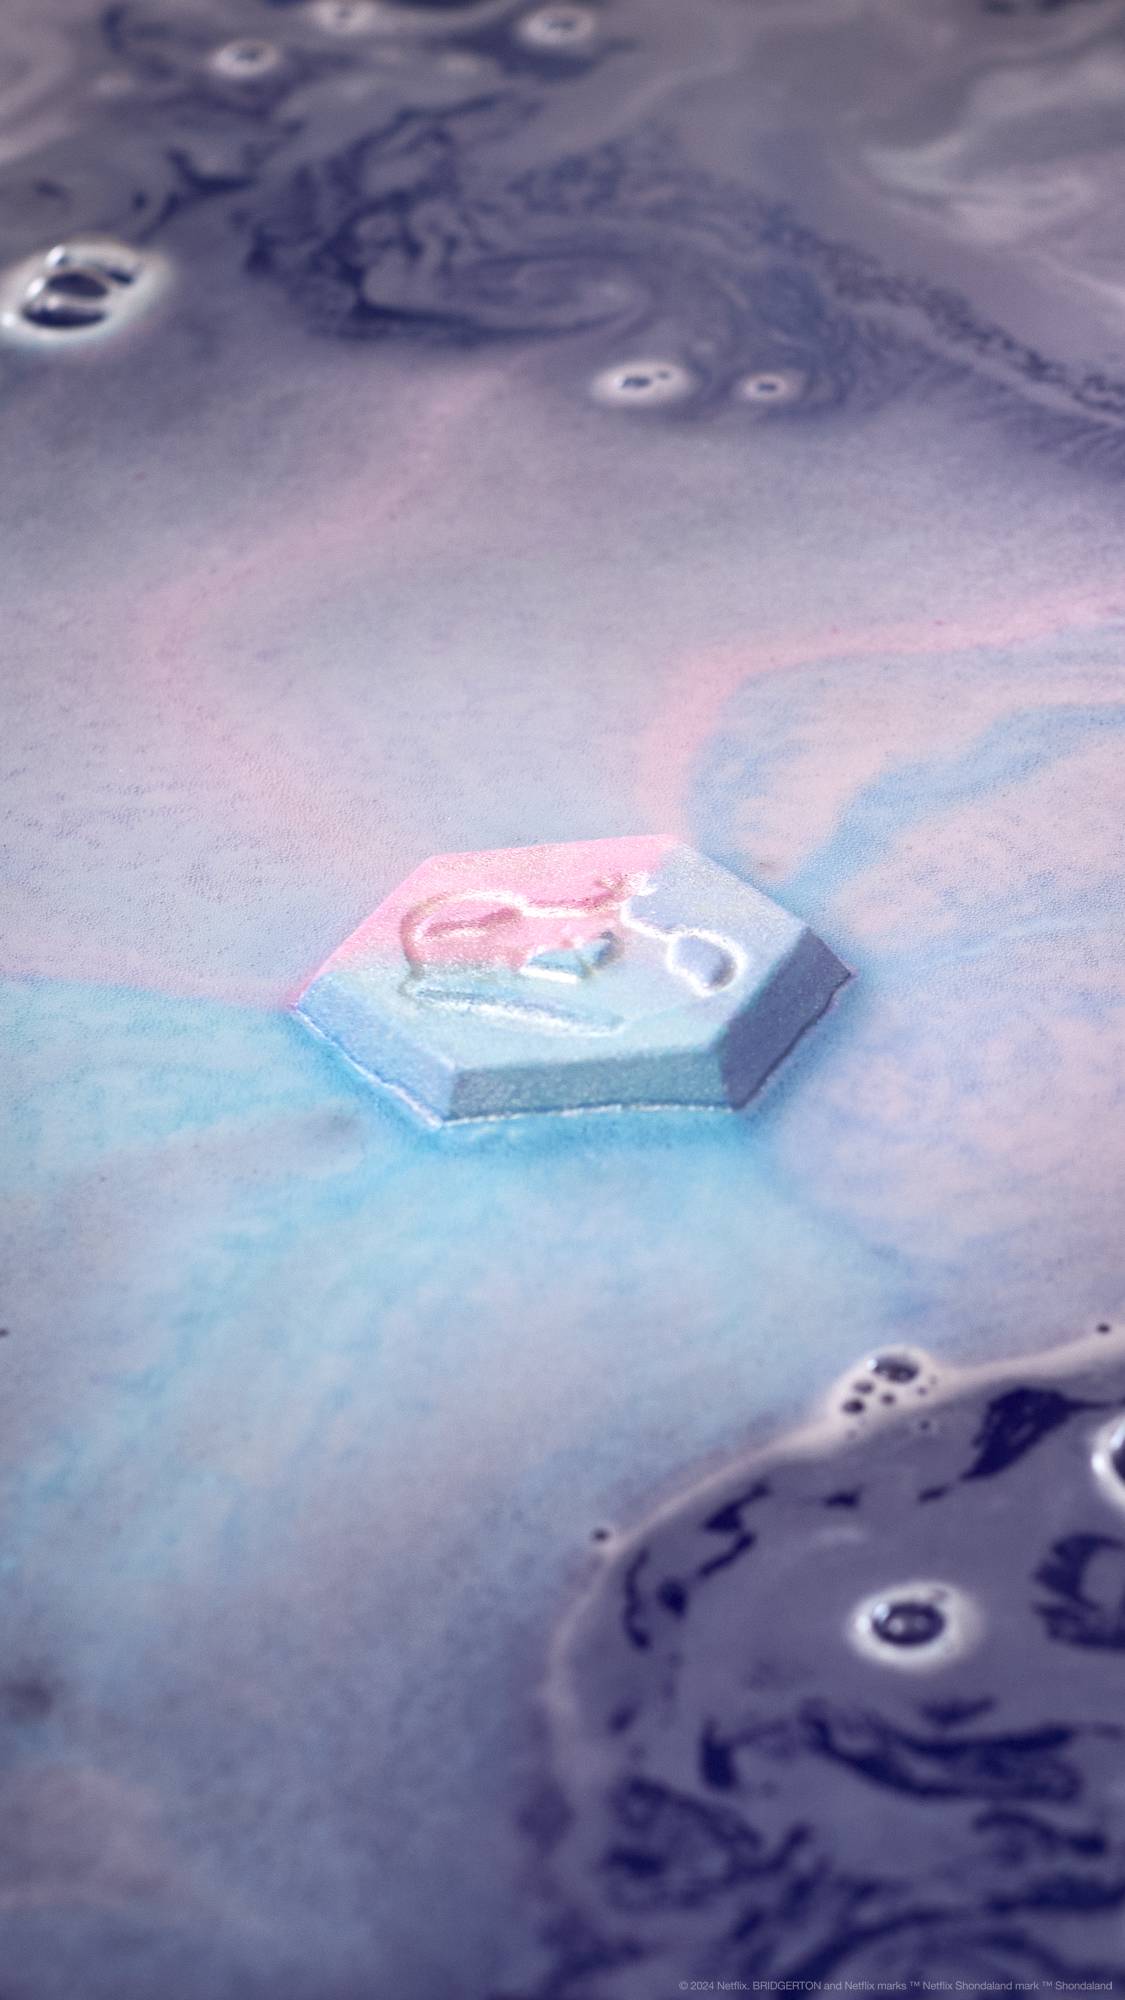 The Colour, Clarity, Carat, Cut bath bomb is slowly dissolving in the bath as it shoots out thick, bubbly pink and blue foam across the surface of shimmering purple waters.